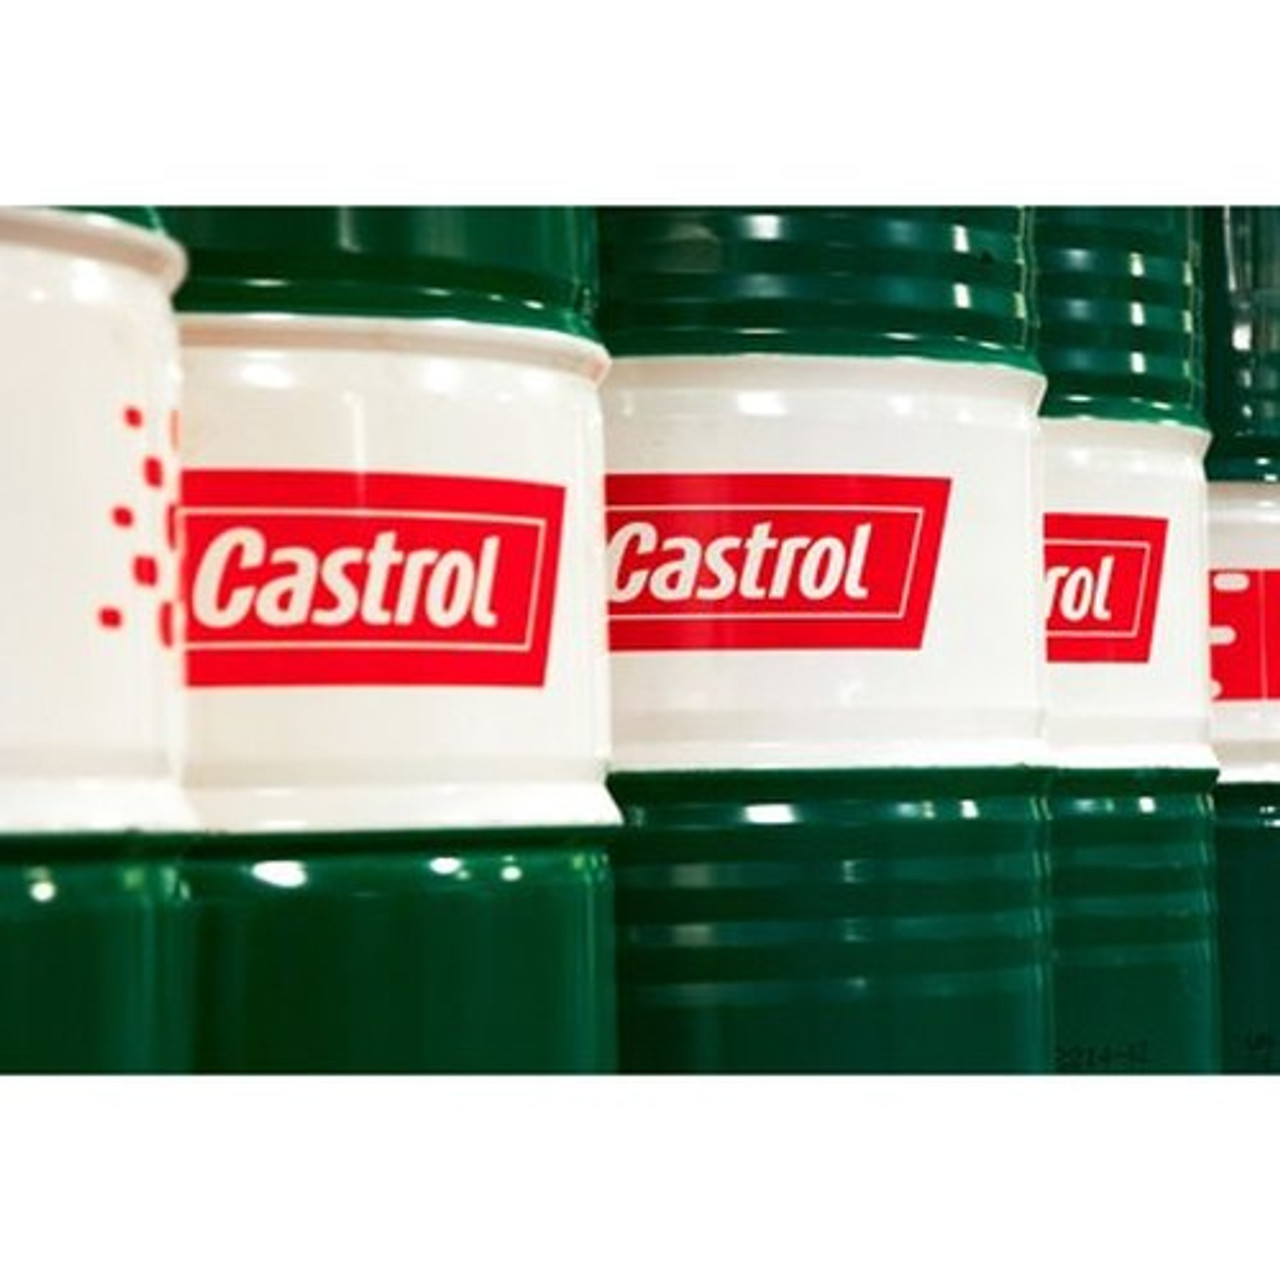 Castrol Hyspin Spindle Oil 2 - 55 Gallon Drum